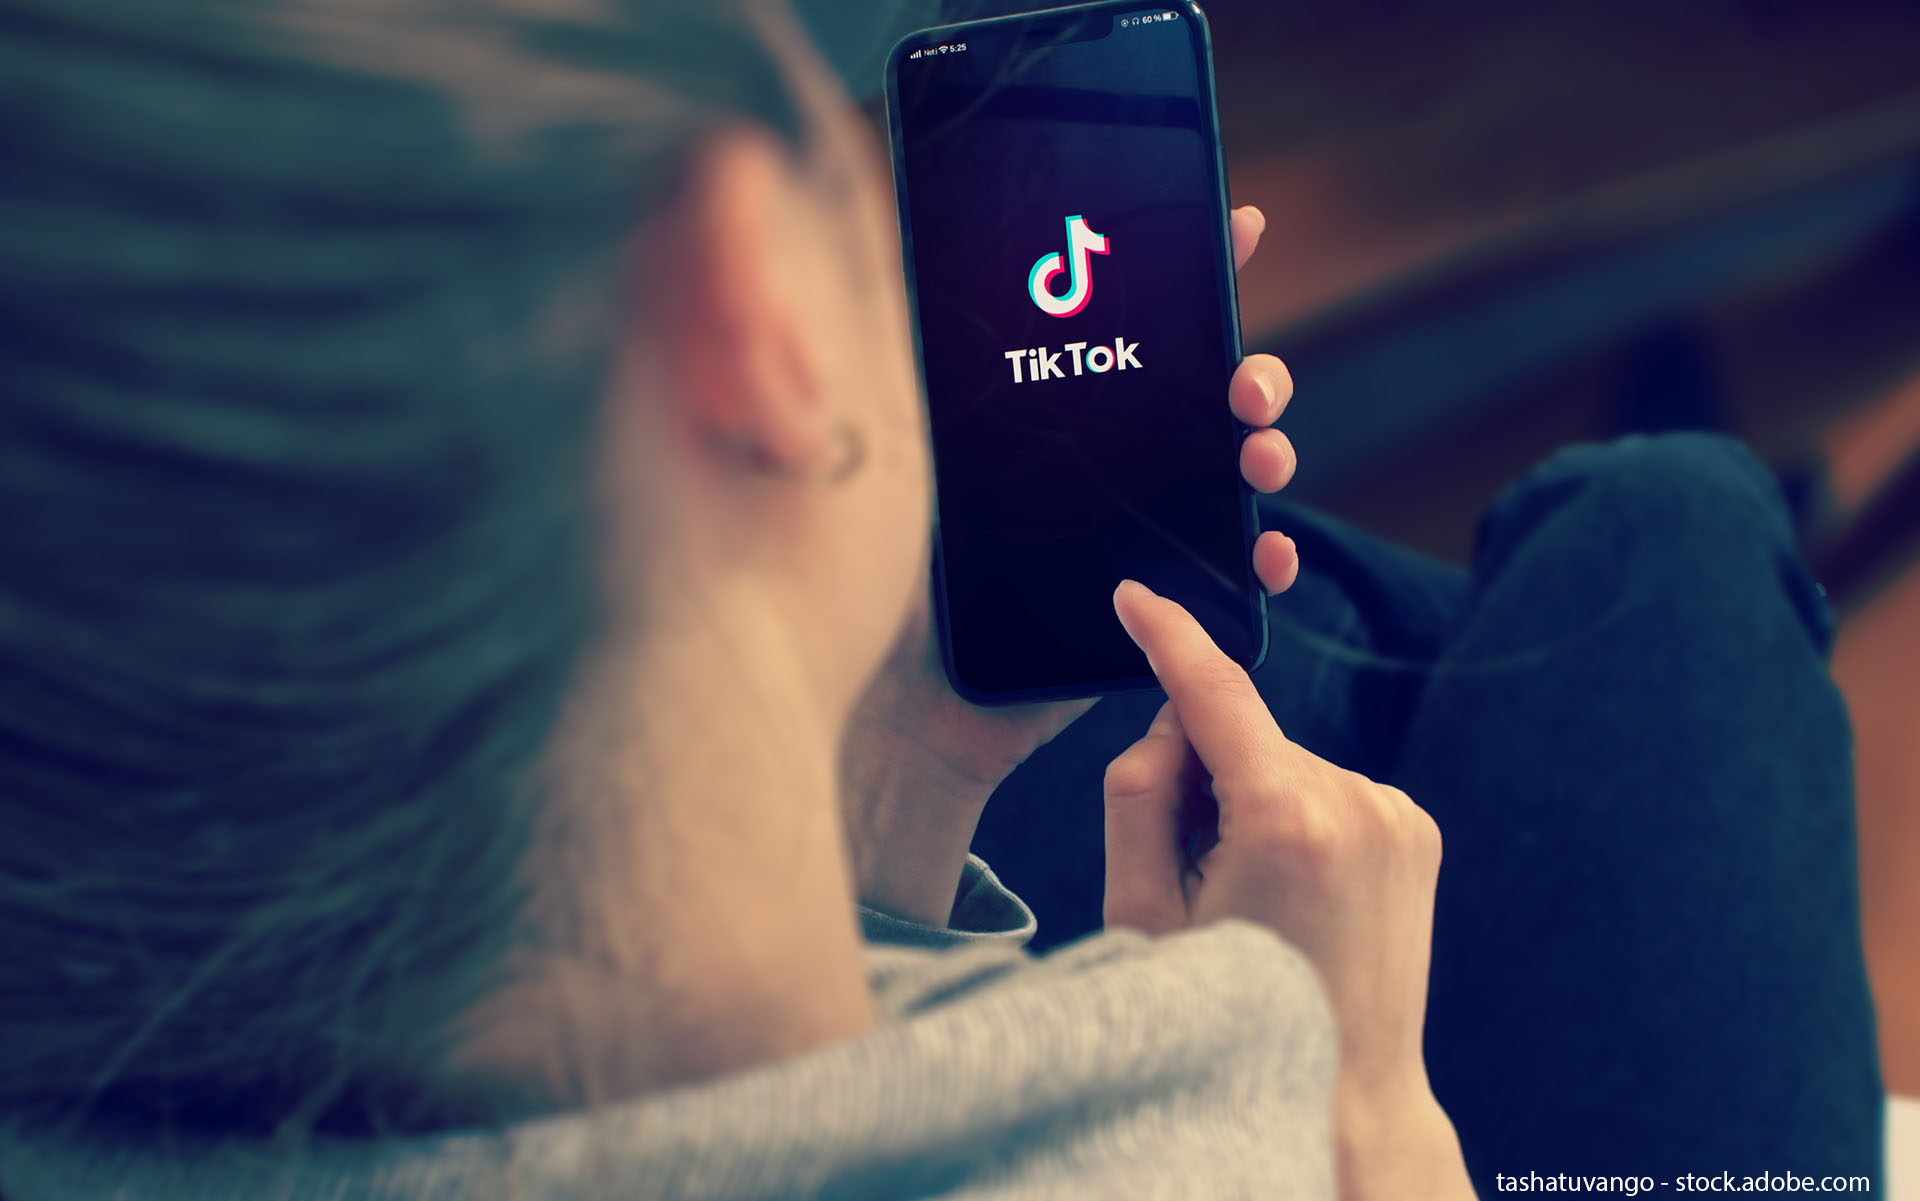 Tiktok on Smart Phone Screen. Young Girl Pointing or Texting Mobile Phone During a Pandemic Self-Isolation and Coronavirus Prevention.